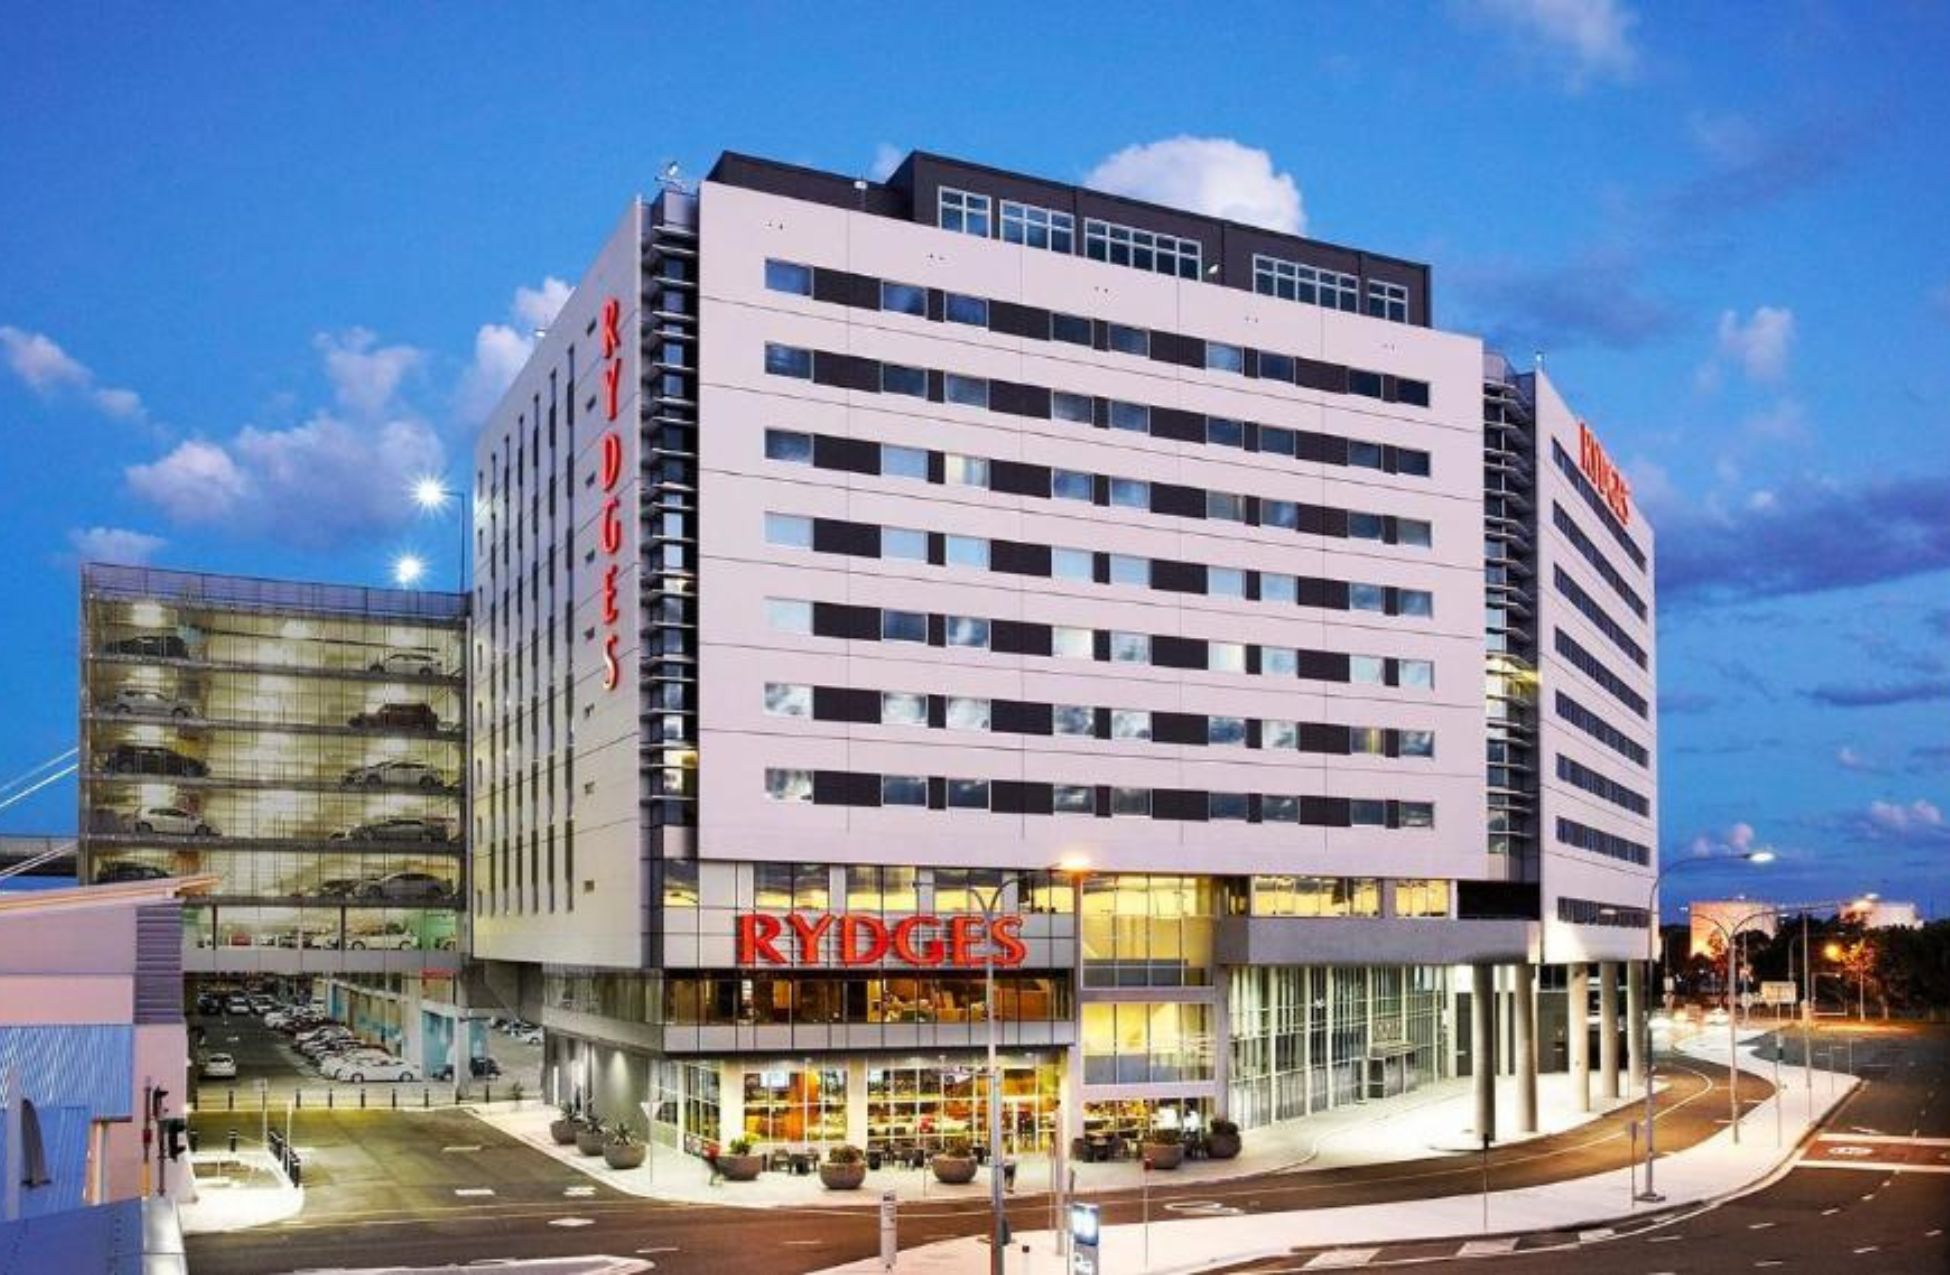 Rydges Sydney Airport Hotel - Best Hotels In Sydney